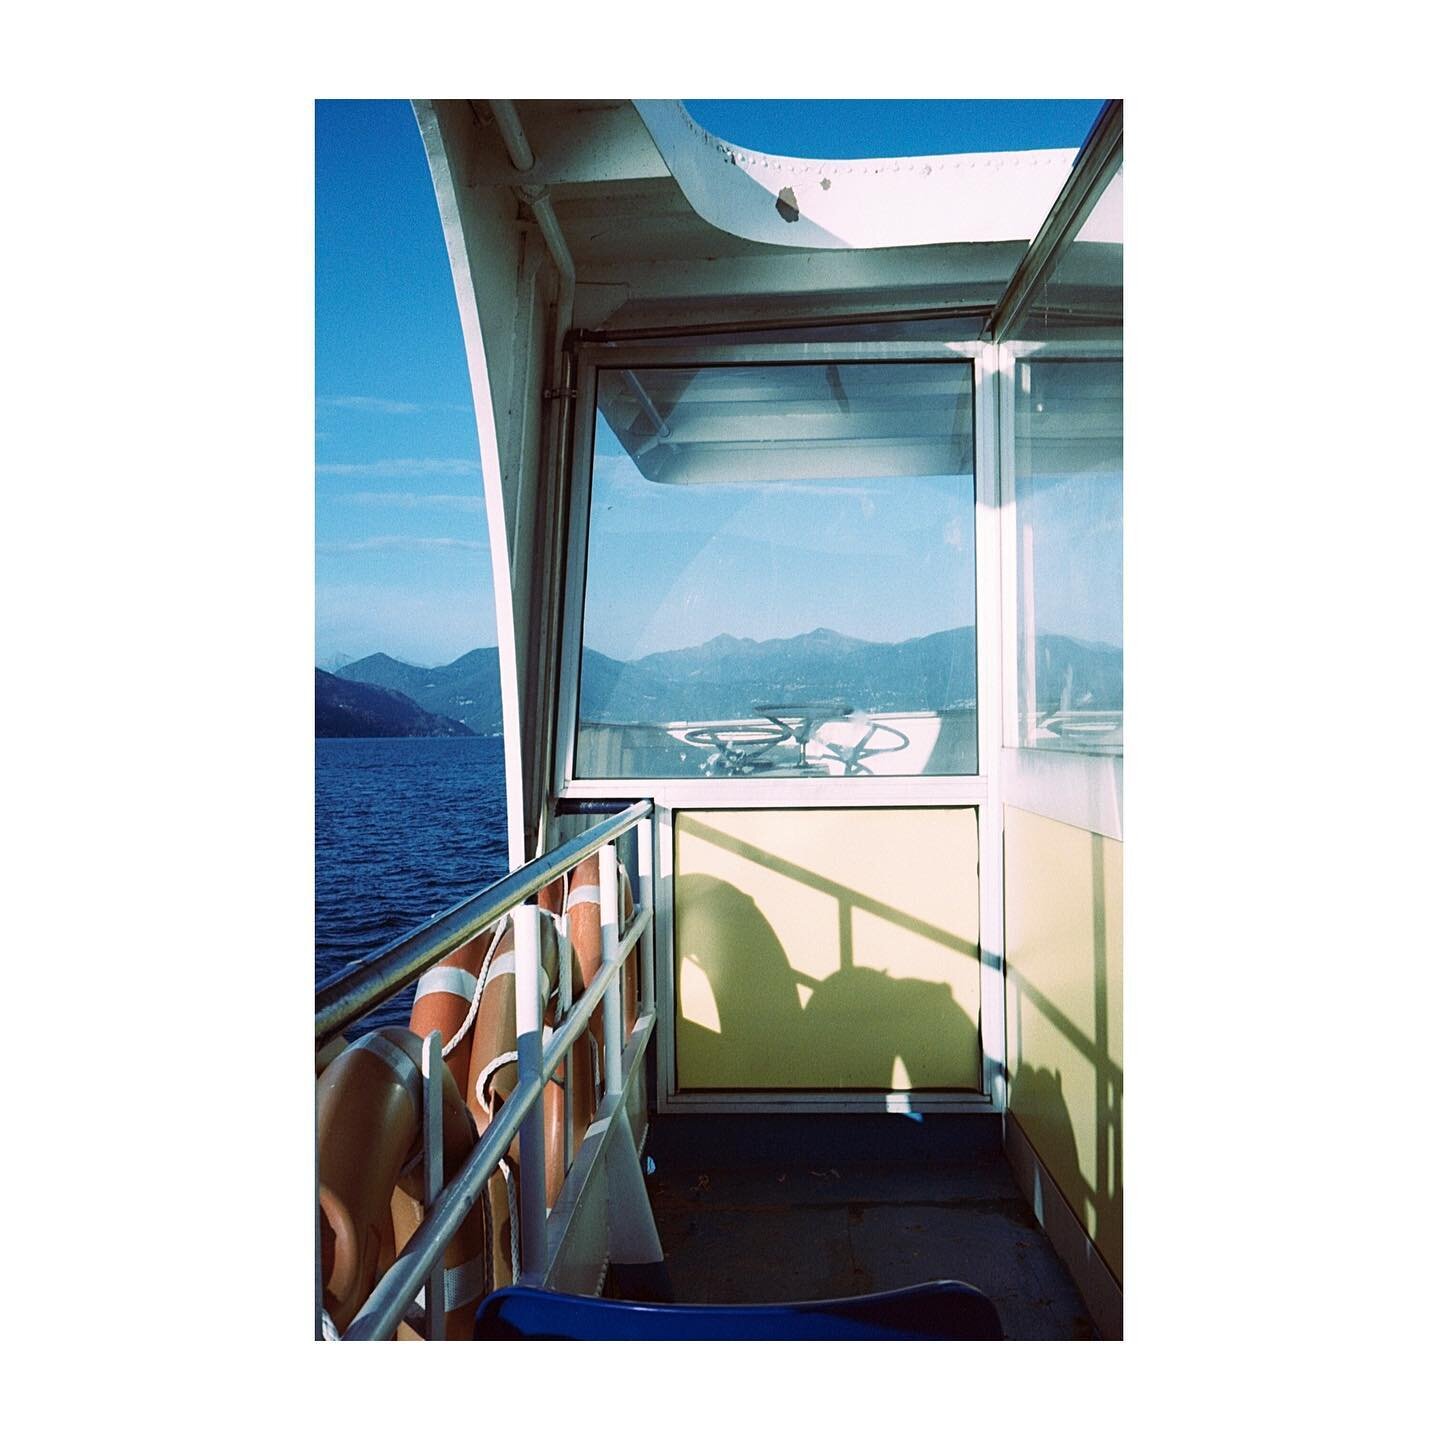 Open deck in blue and yellow, served on mountain backdrop 🍴

Lago Maggiore, 2022

#filmisnotdead #lakemaggioreitaly #onaboat #opendeck #mountains #switzerland🇨🇭 #35mm #canonetql17giii #kodakportra